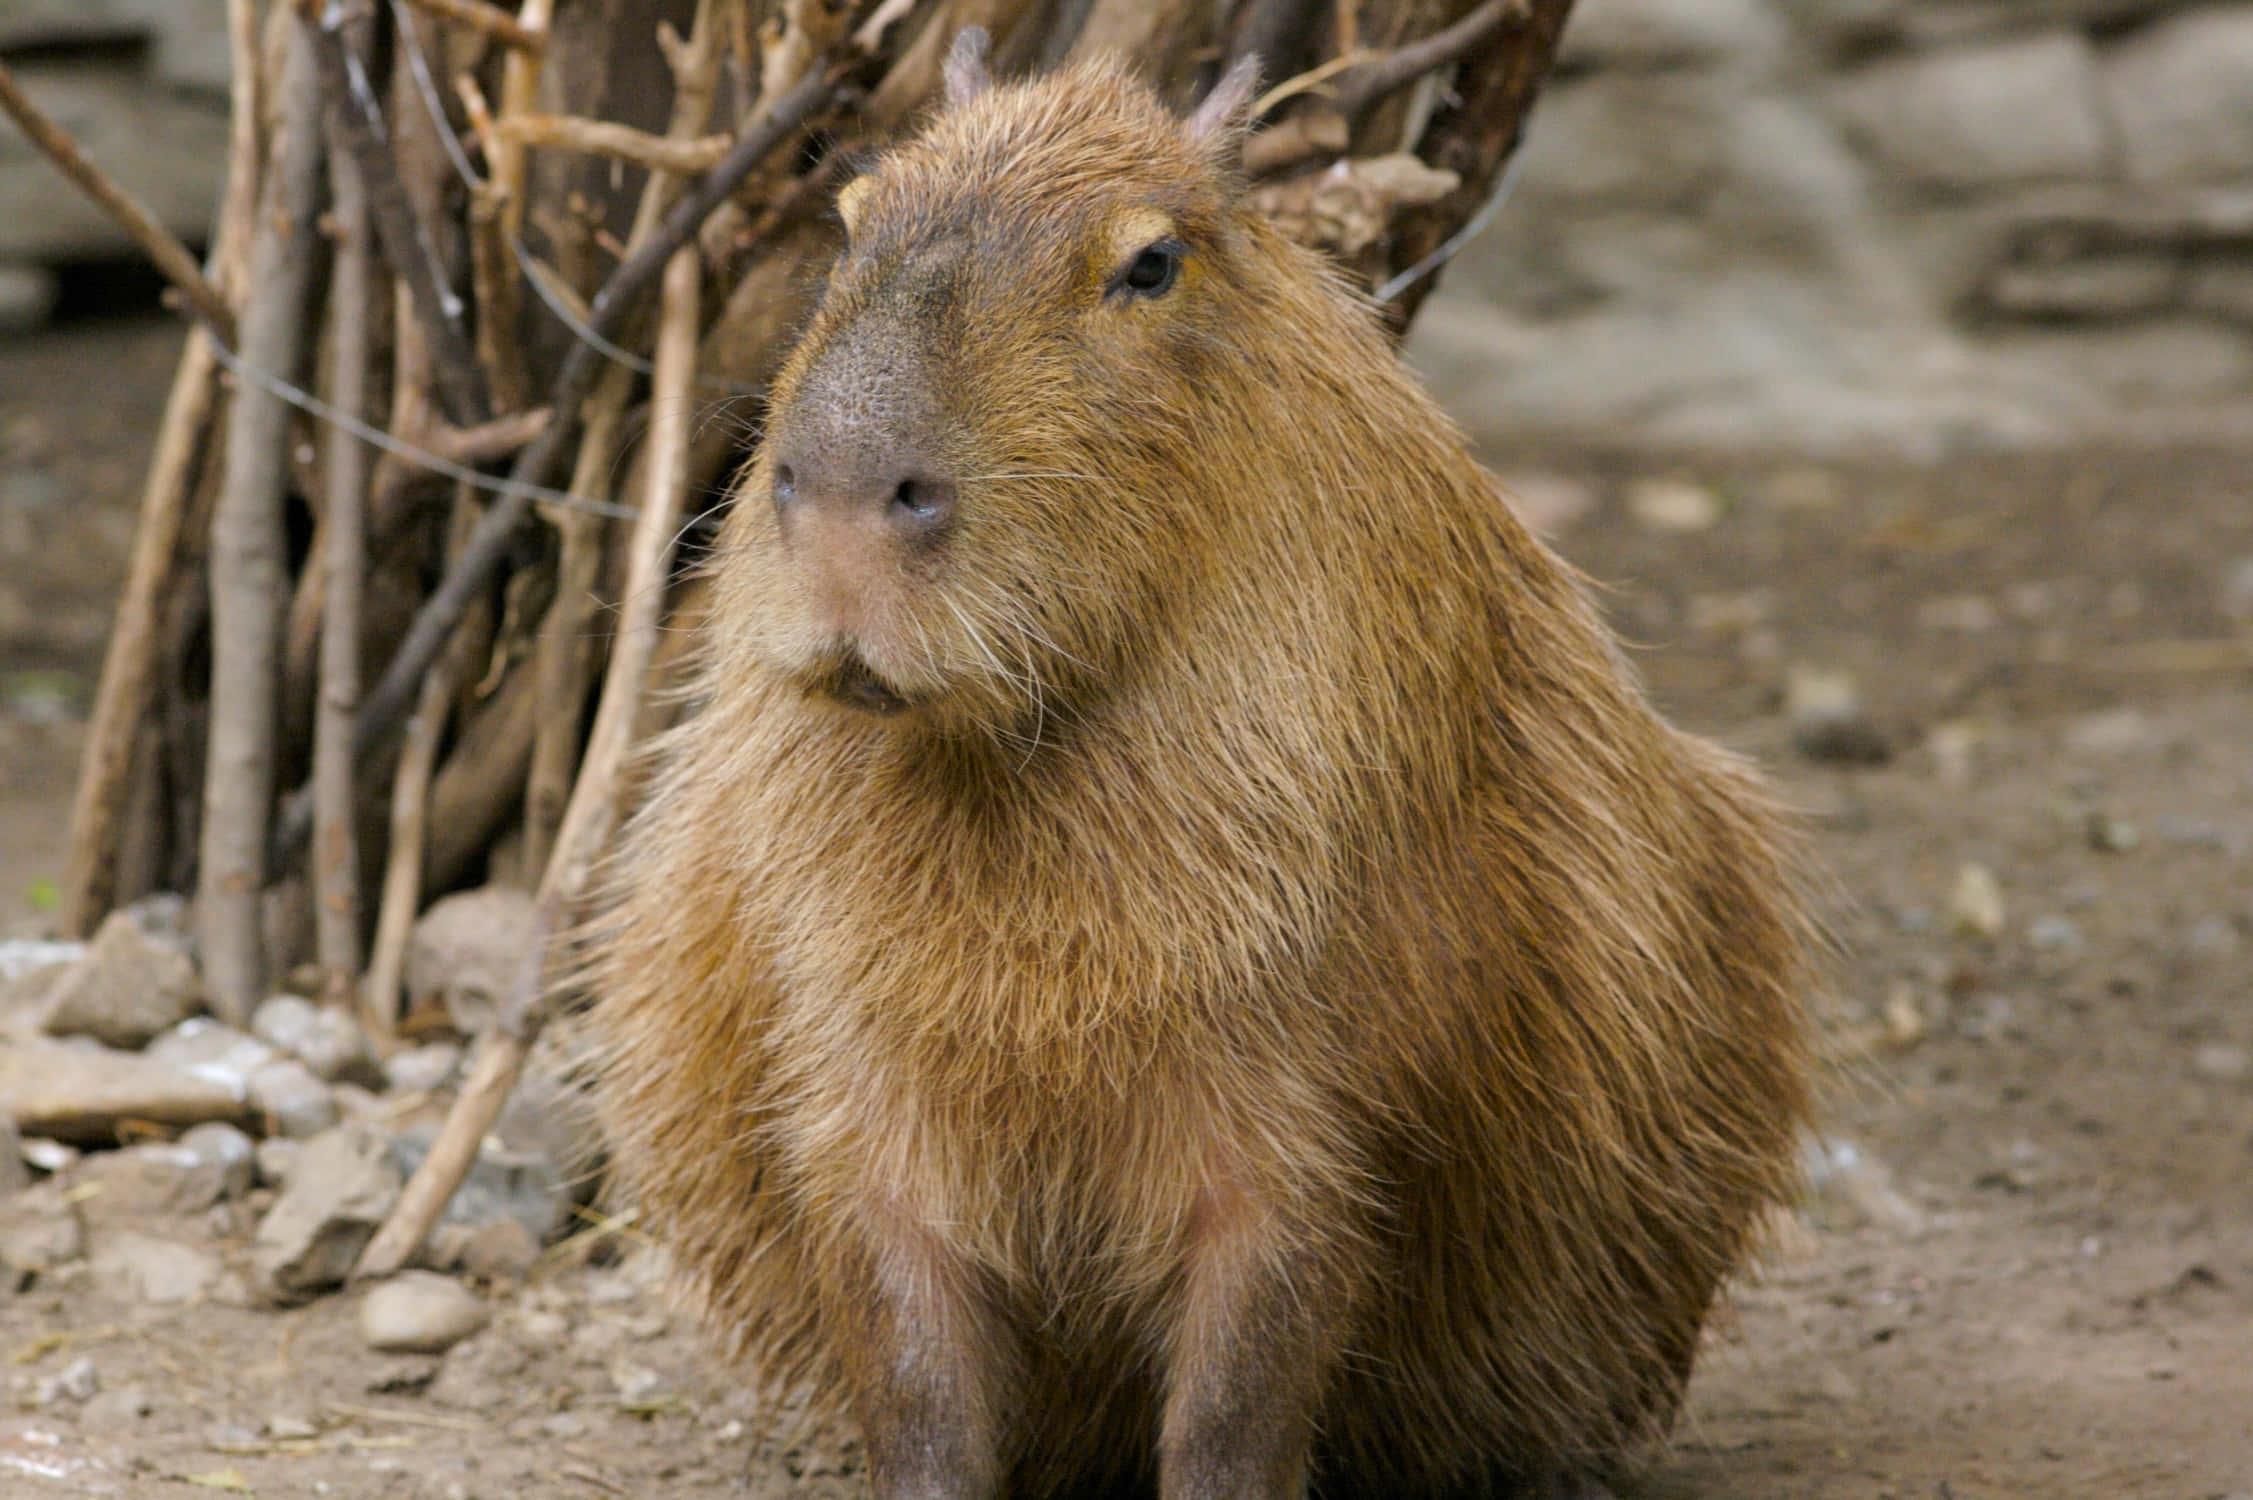 A Capybara Standing In The Dirt